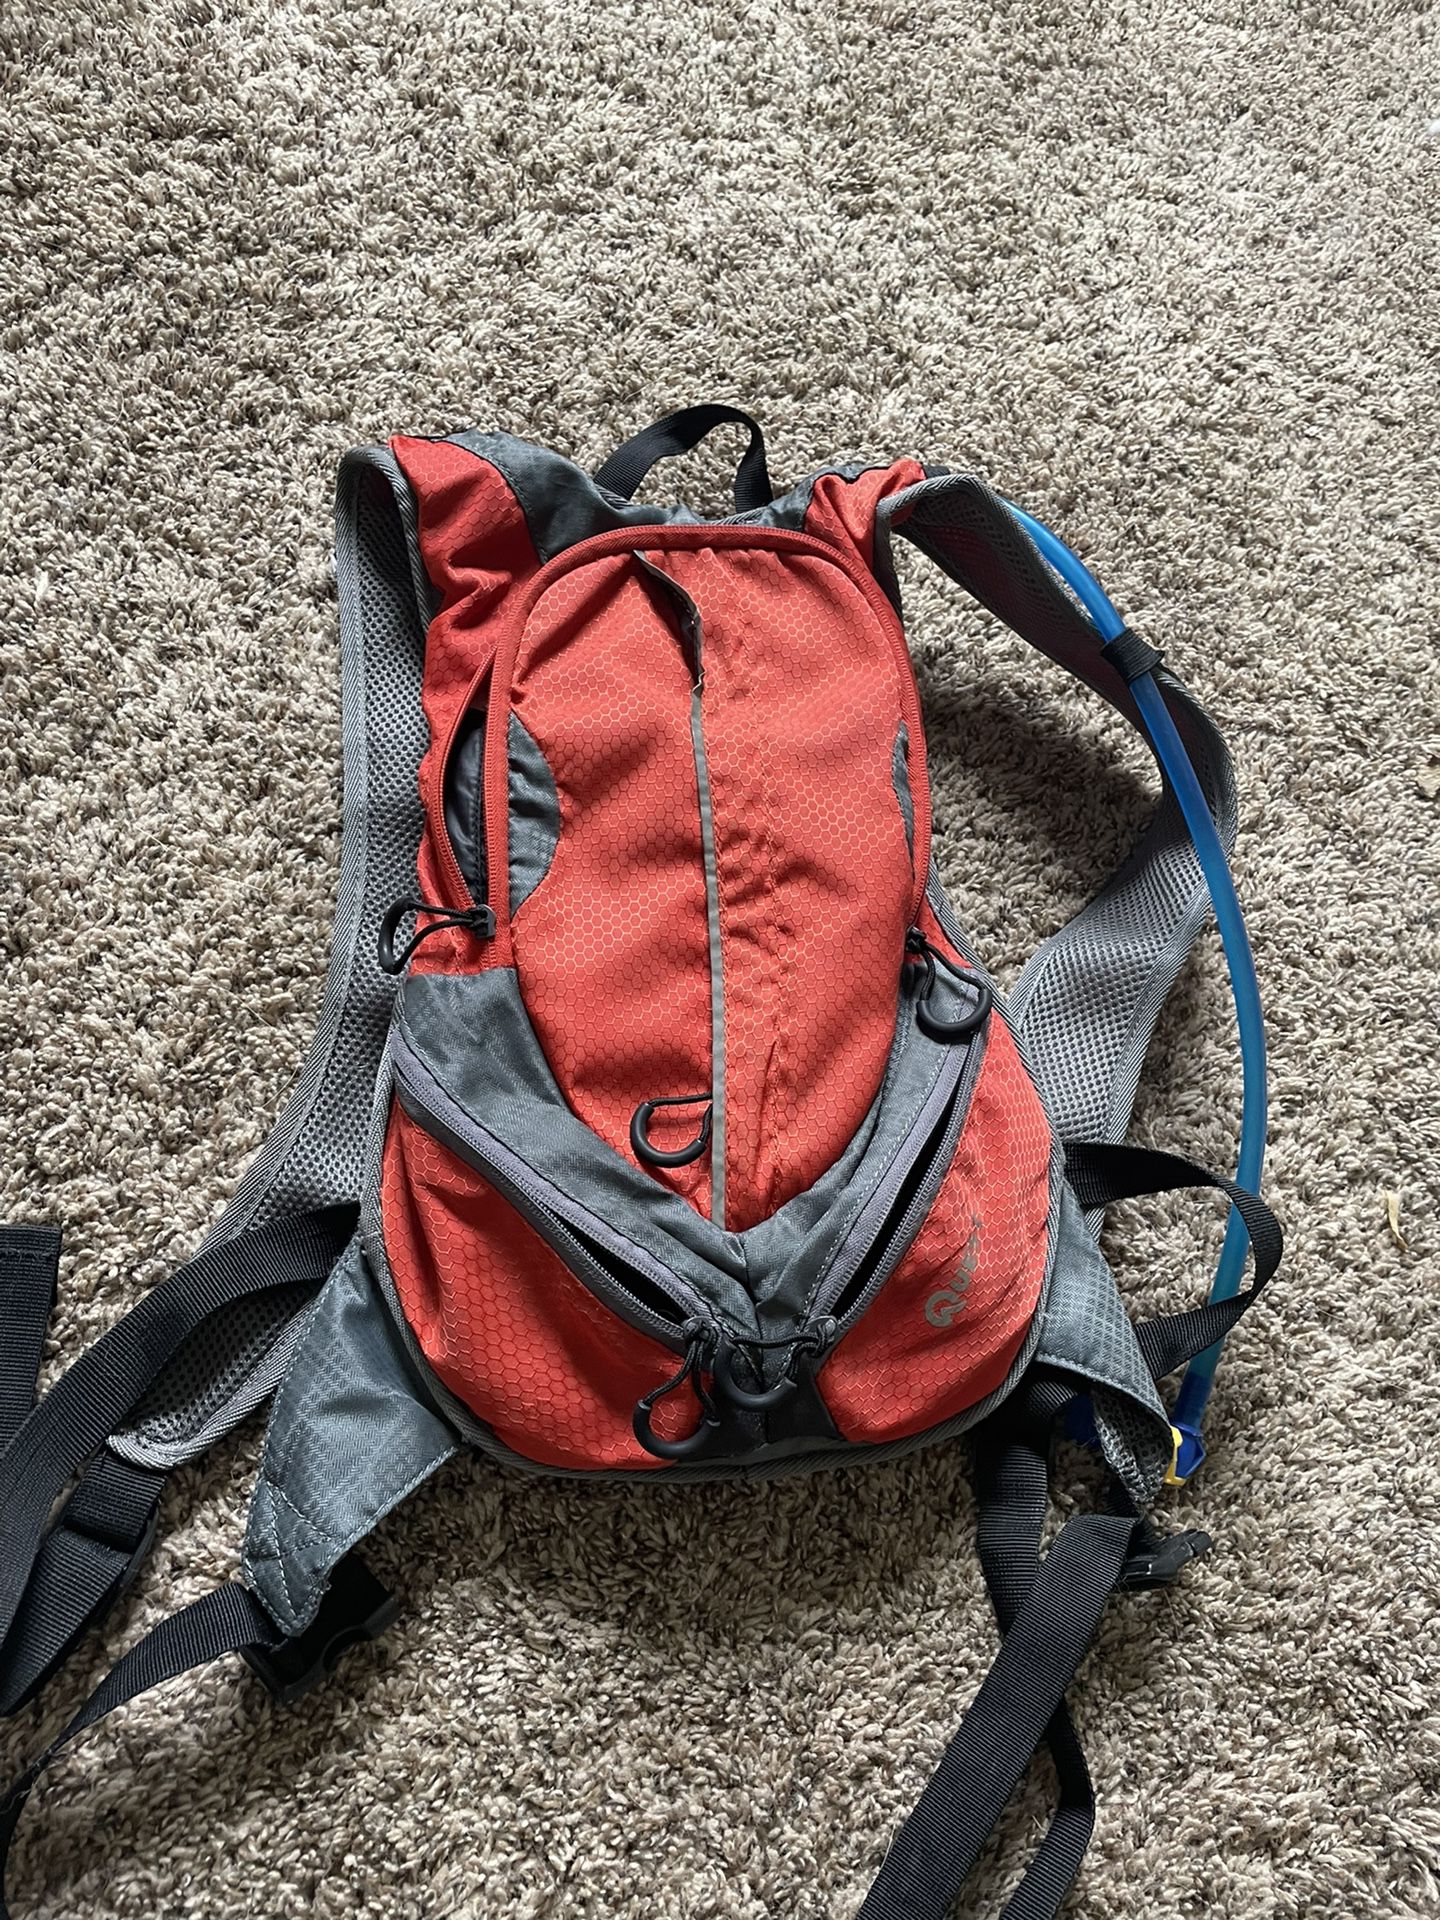 Quest Hydration Pack